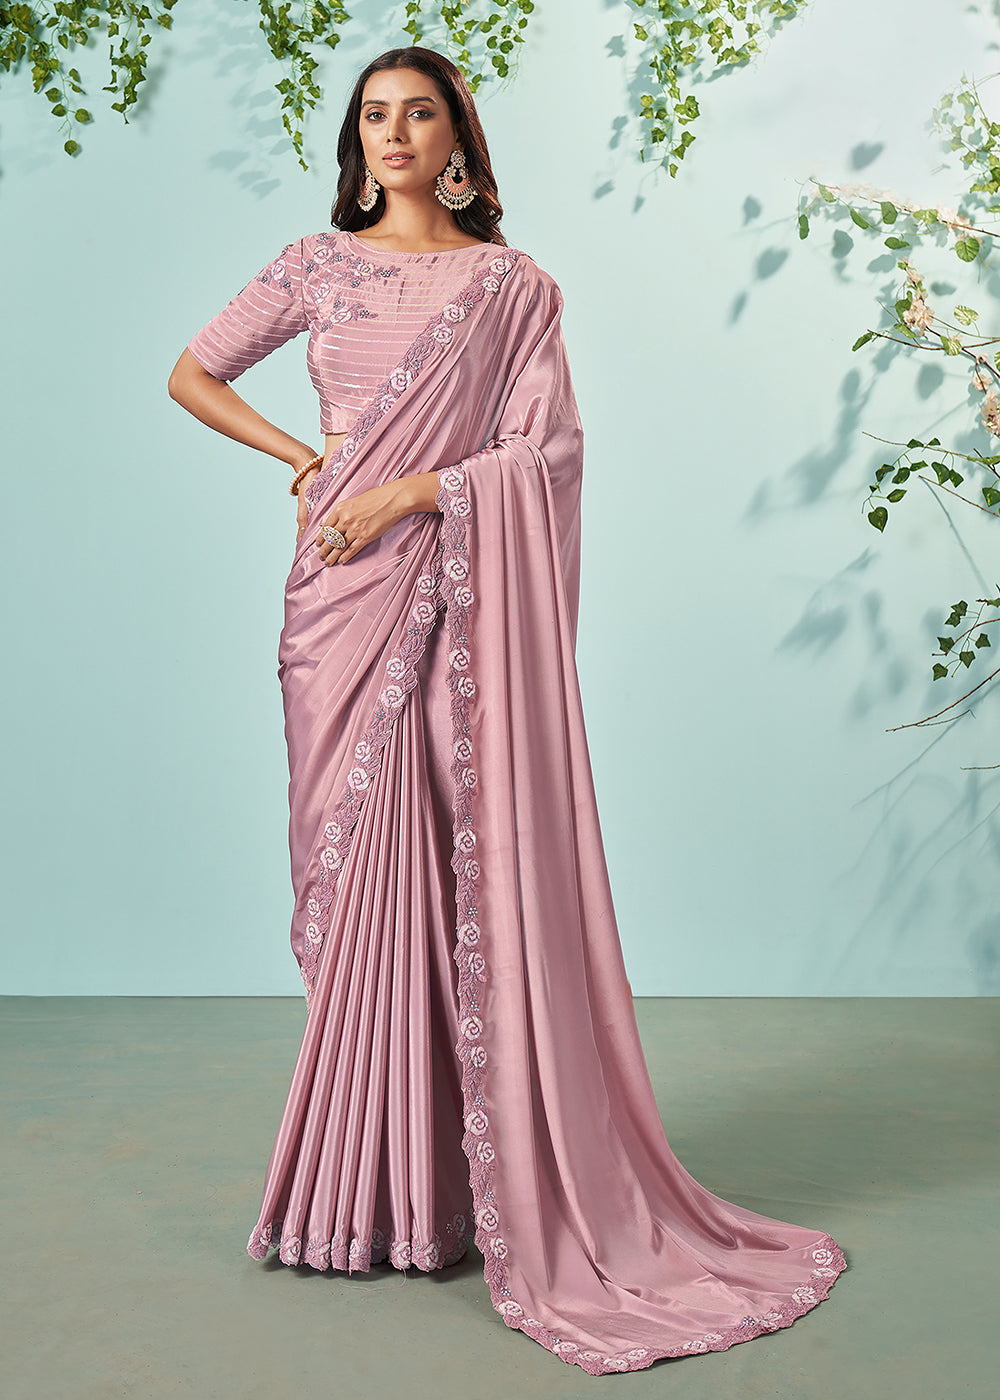 Buy Now Onion Pink Silk Crepe Embroidered Designer Saree Online in USA, UK, Canada & Worldwide at Empress Clothing.